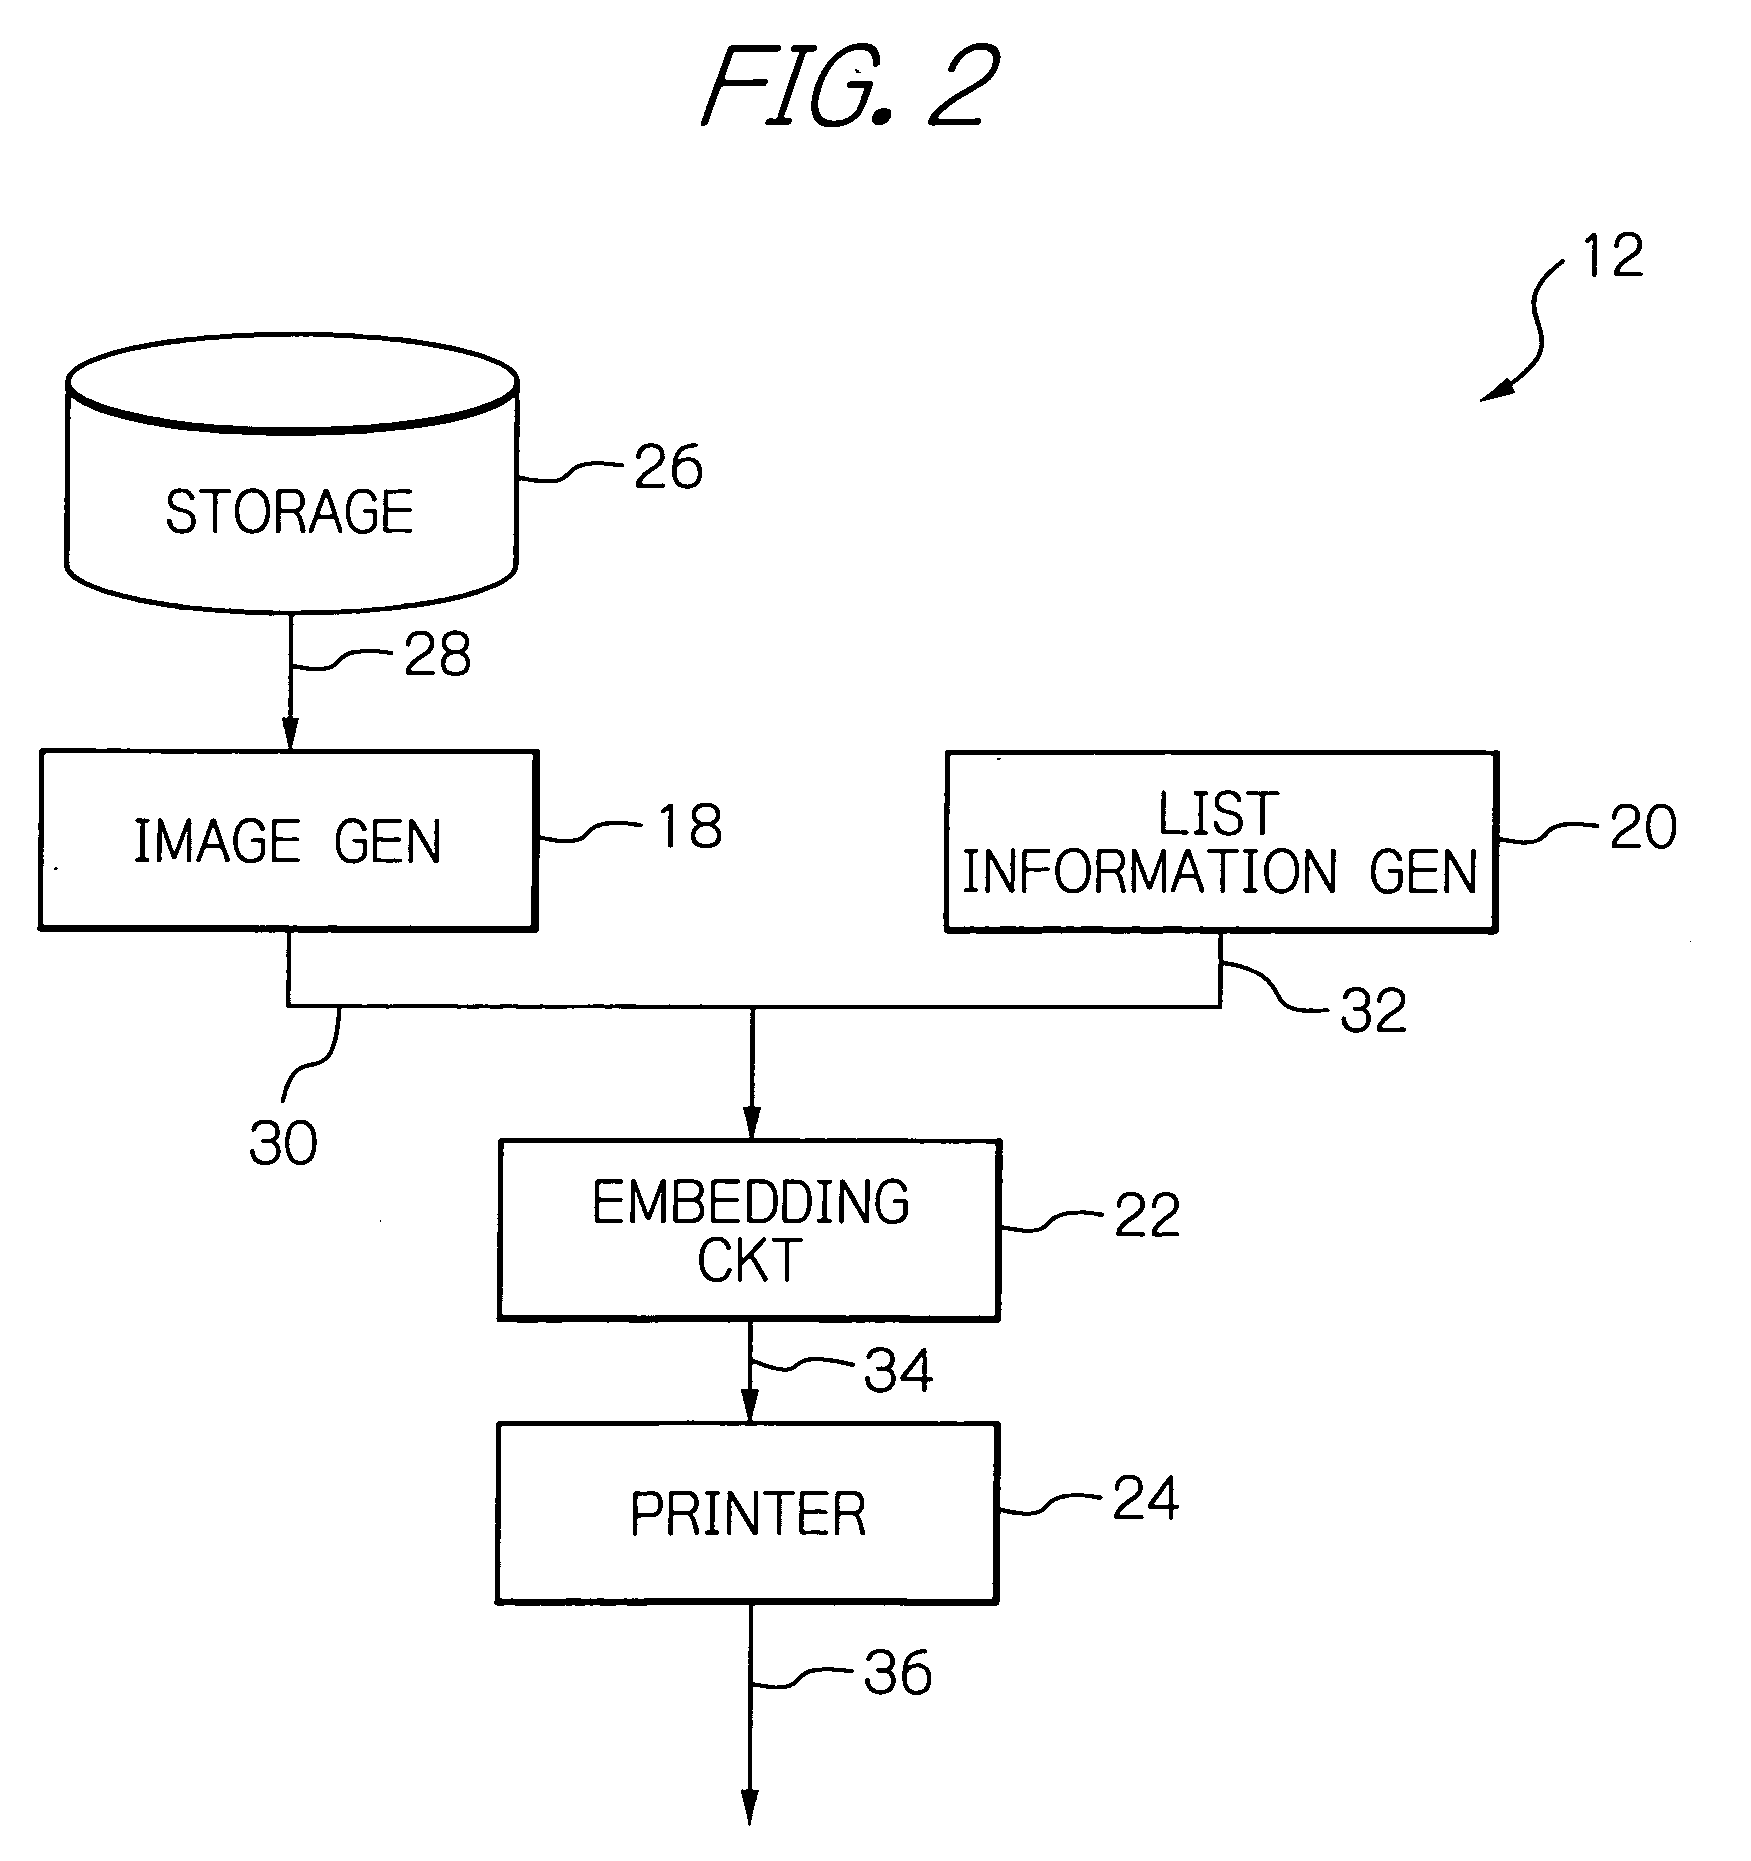 System for managing flexible copying with information leakage prevented and/or detected